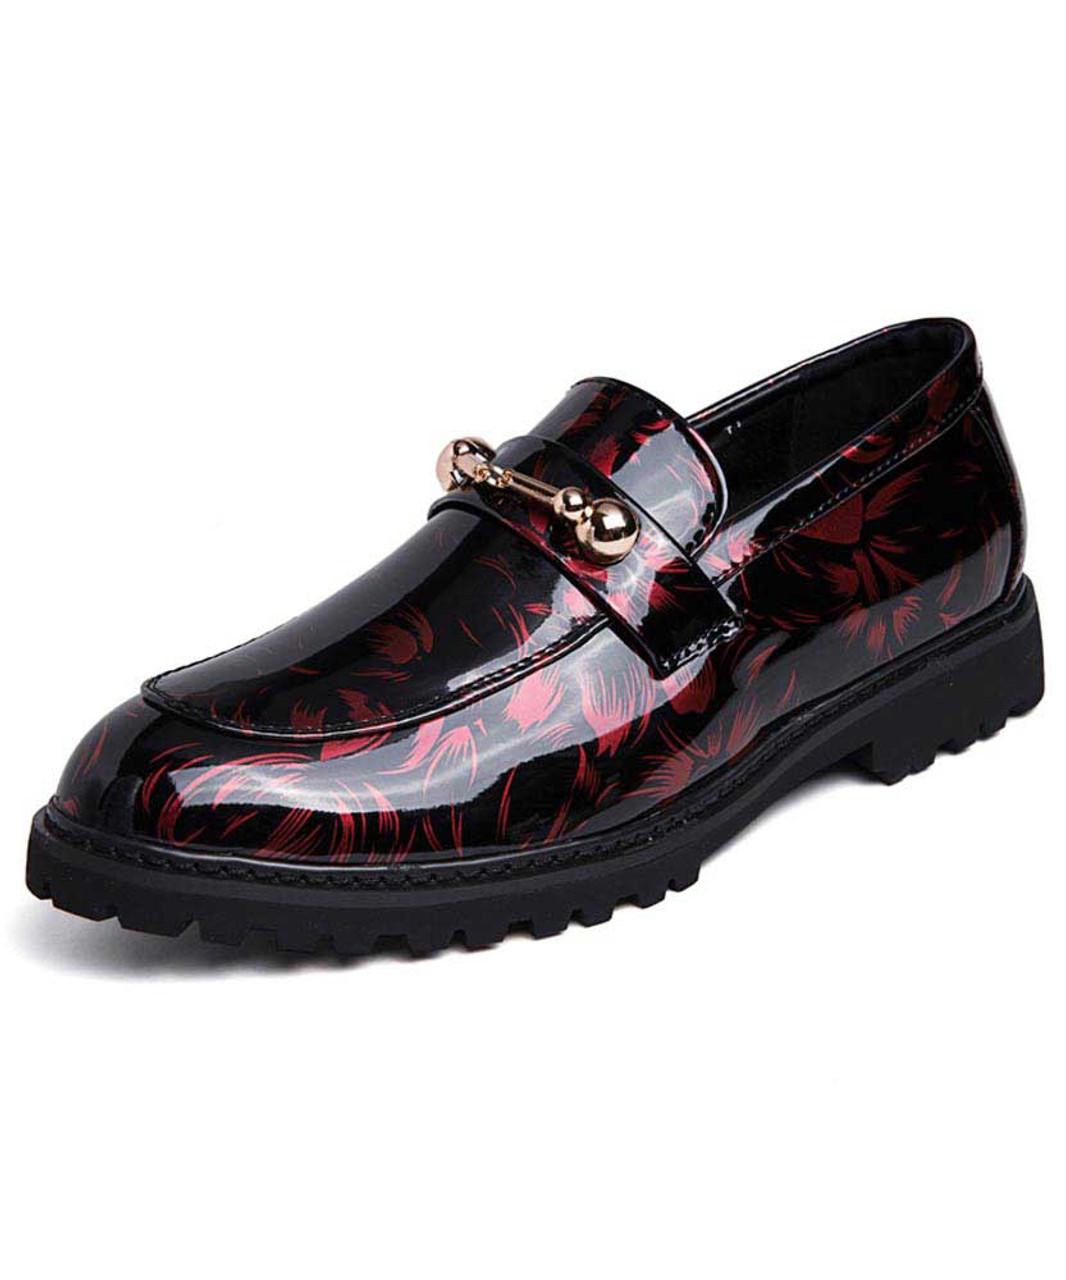 red casual dress shoes